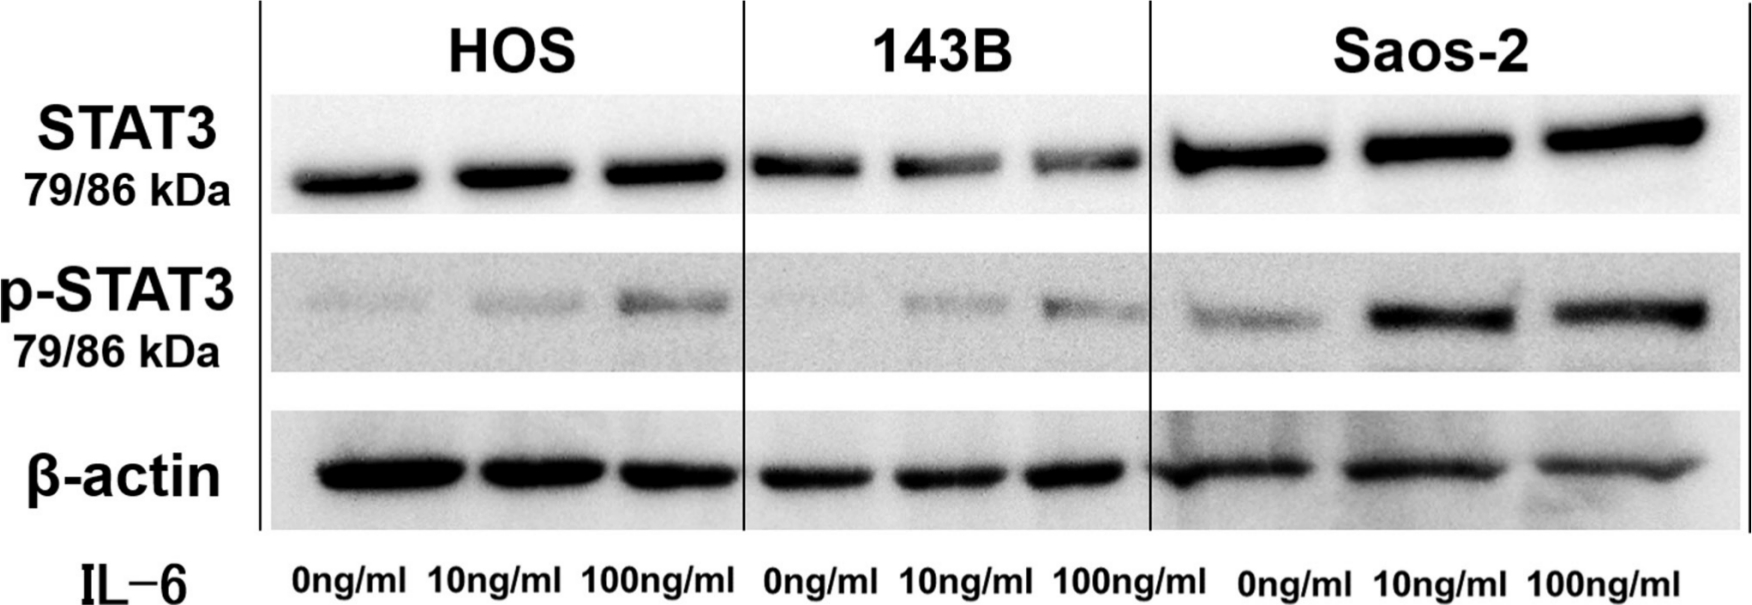 Fig. 3 
            Representative western blot images showing effect of interleukin-6 (IL-6) on phosphorylation of signal transducer and activator of transcription 3 (STAT3) in 143B, HOS, and Saos-2 cells. p-STAT3, phospho-STAT3.
          